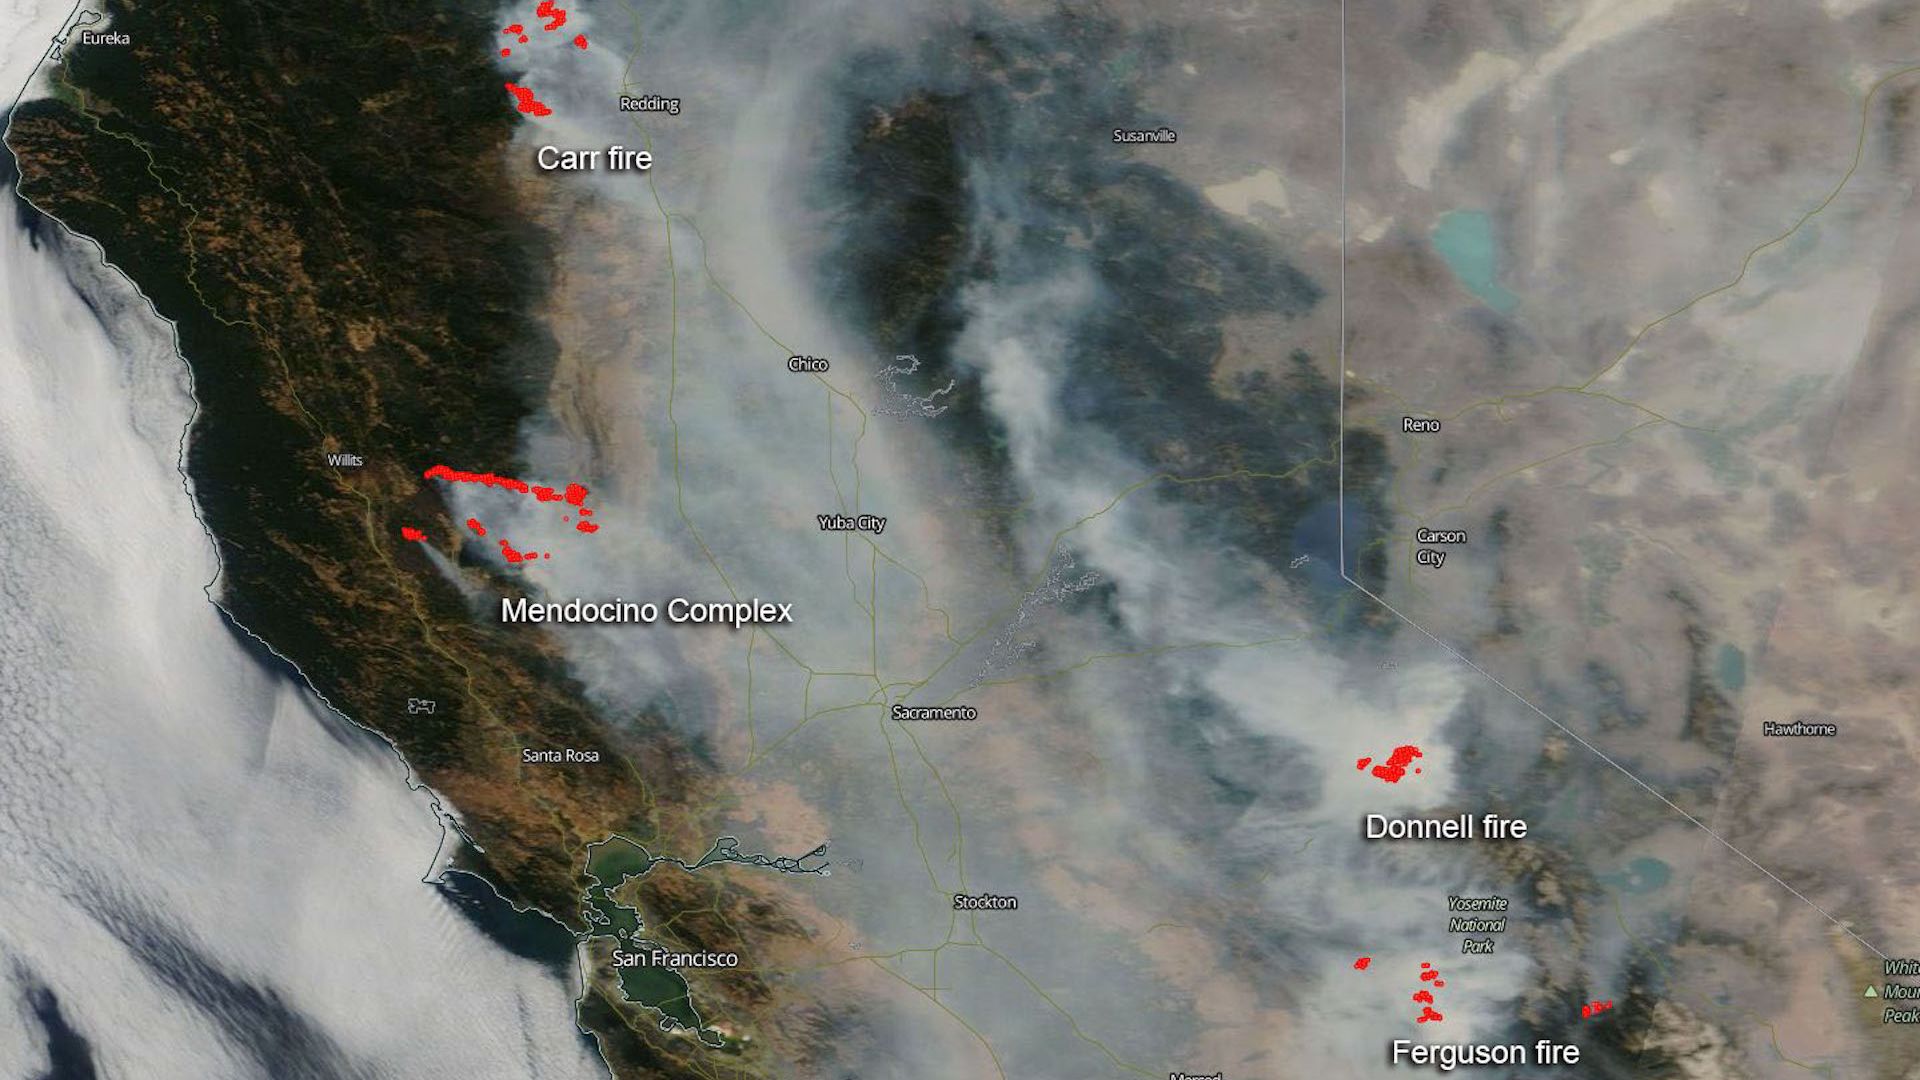 Satellite view showing smoke from California wildfires blanketing the state on Aug. 7, 2018.